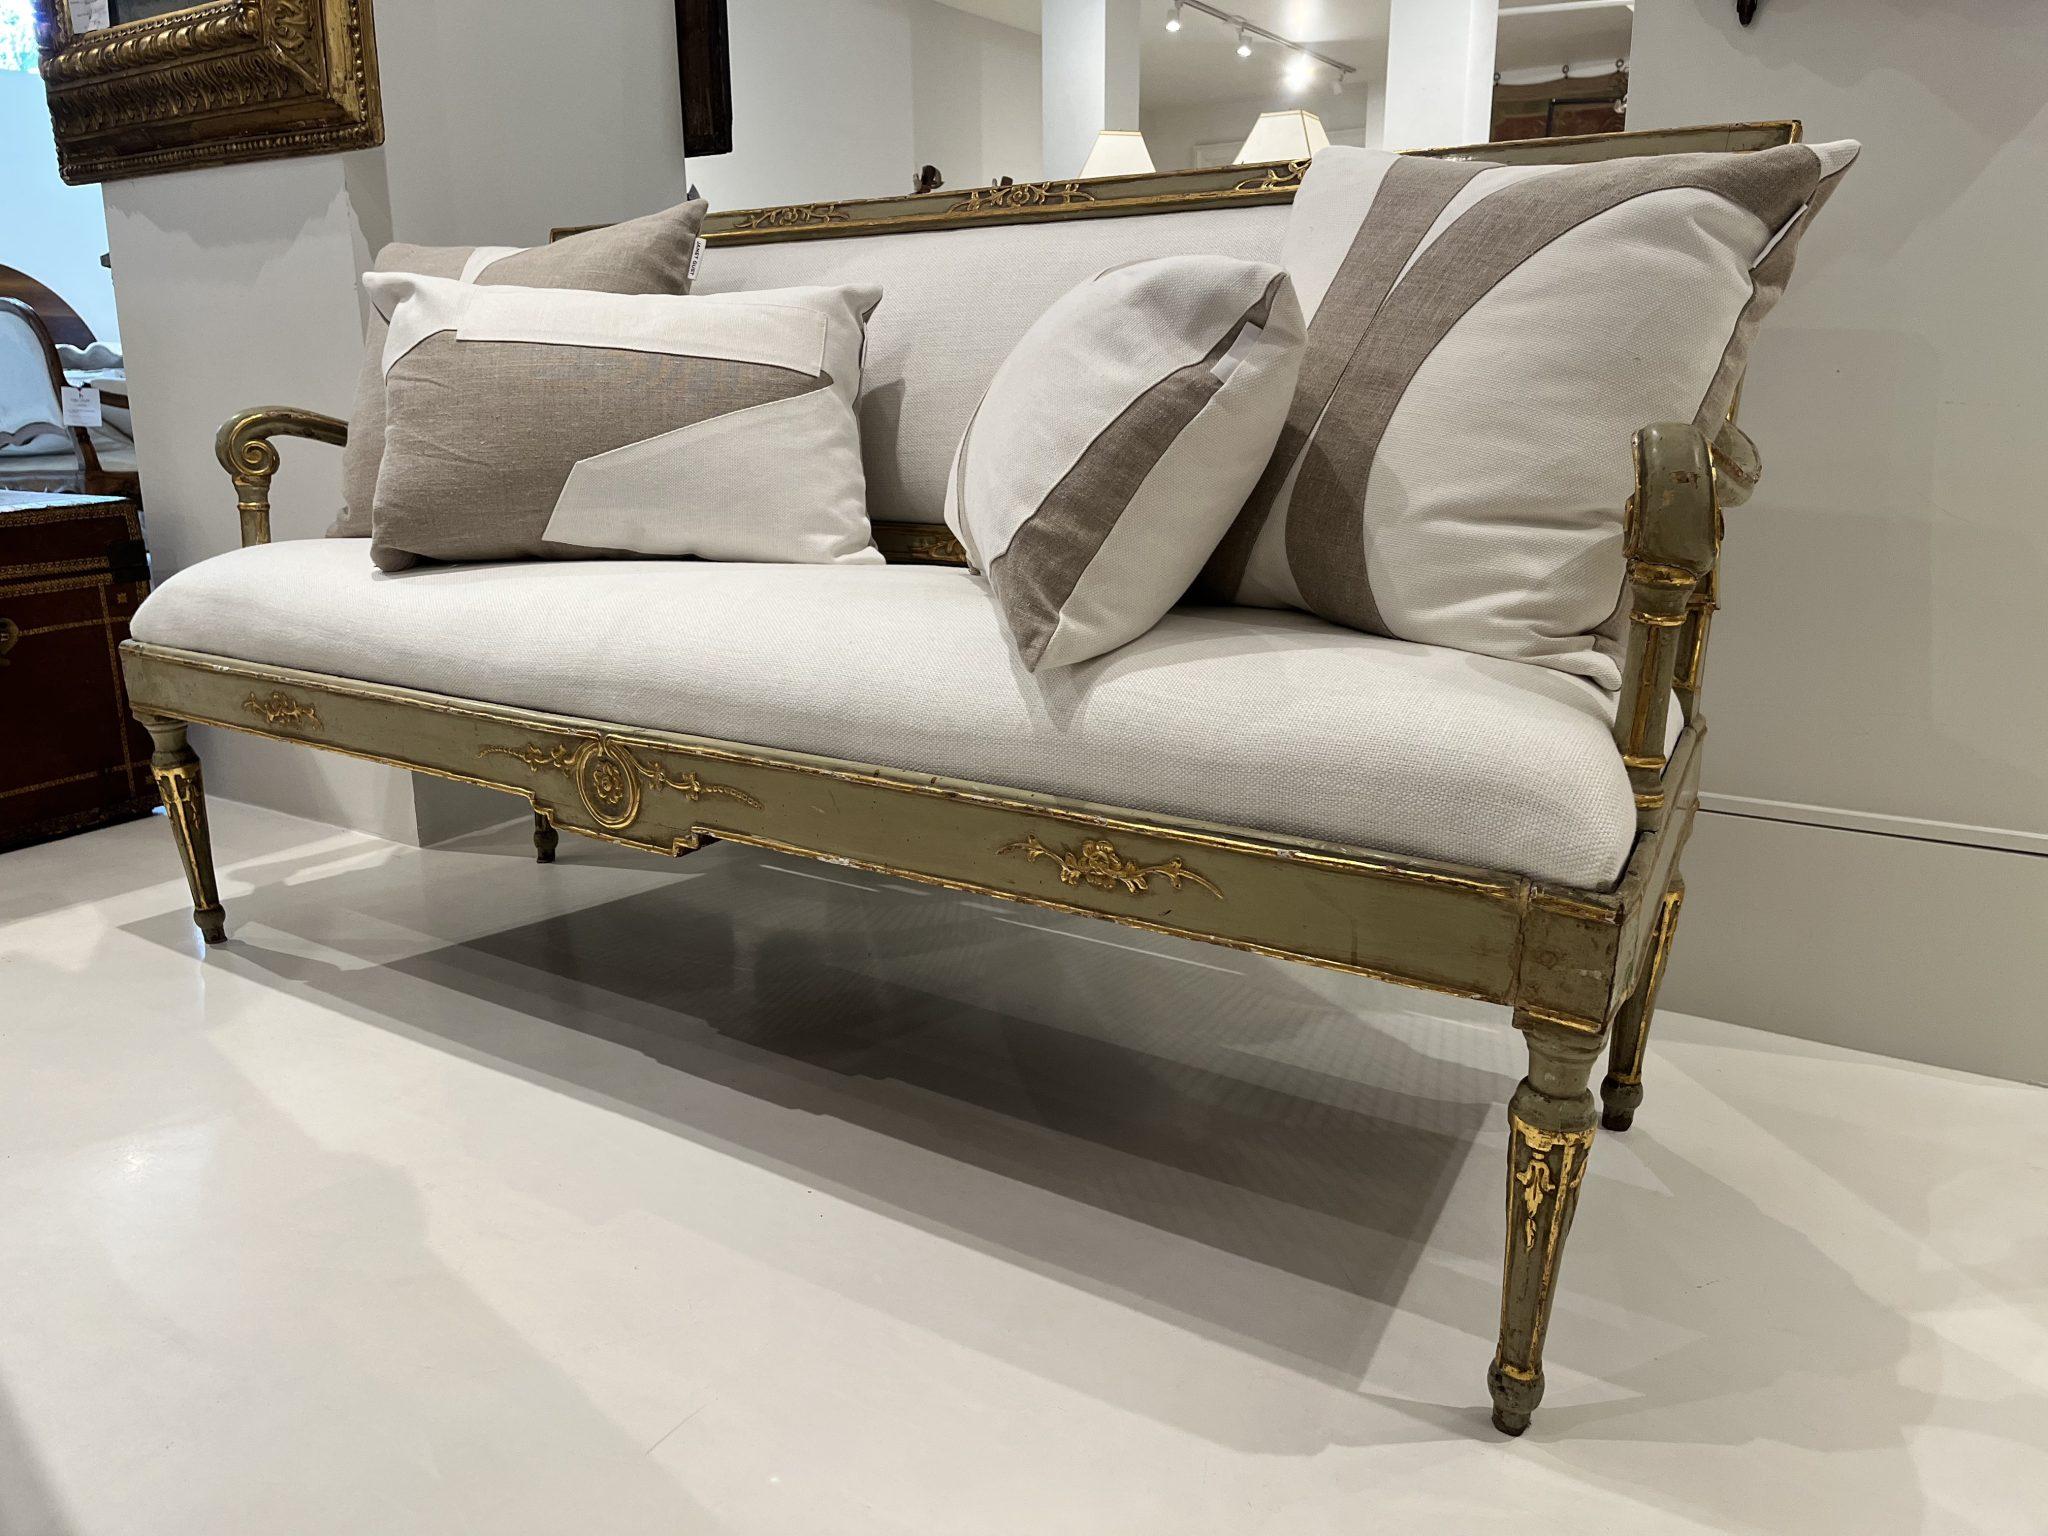 18th Century bench with exquisitely carved wood with gilded detail. Pale green lacquer enhanced by white Belgian Linen upholstery. Elegant addition to any room.